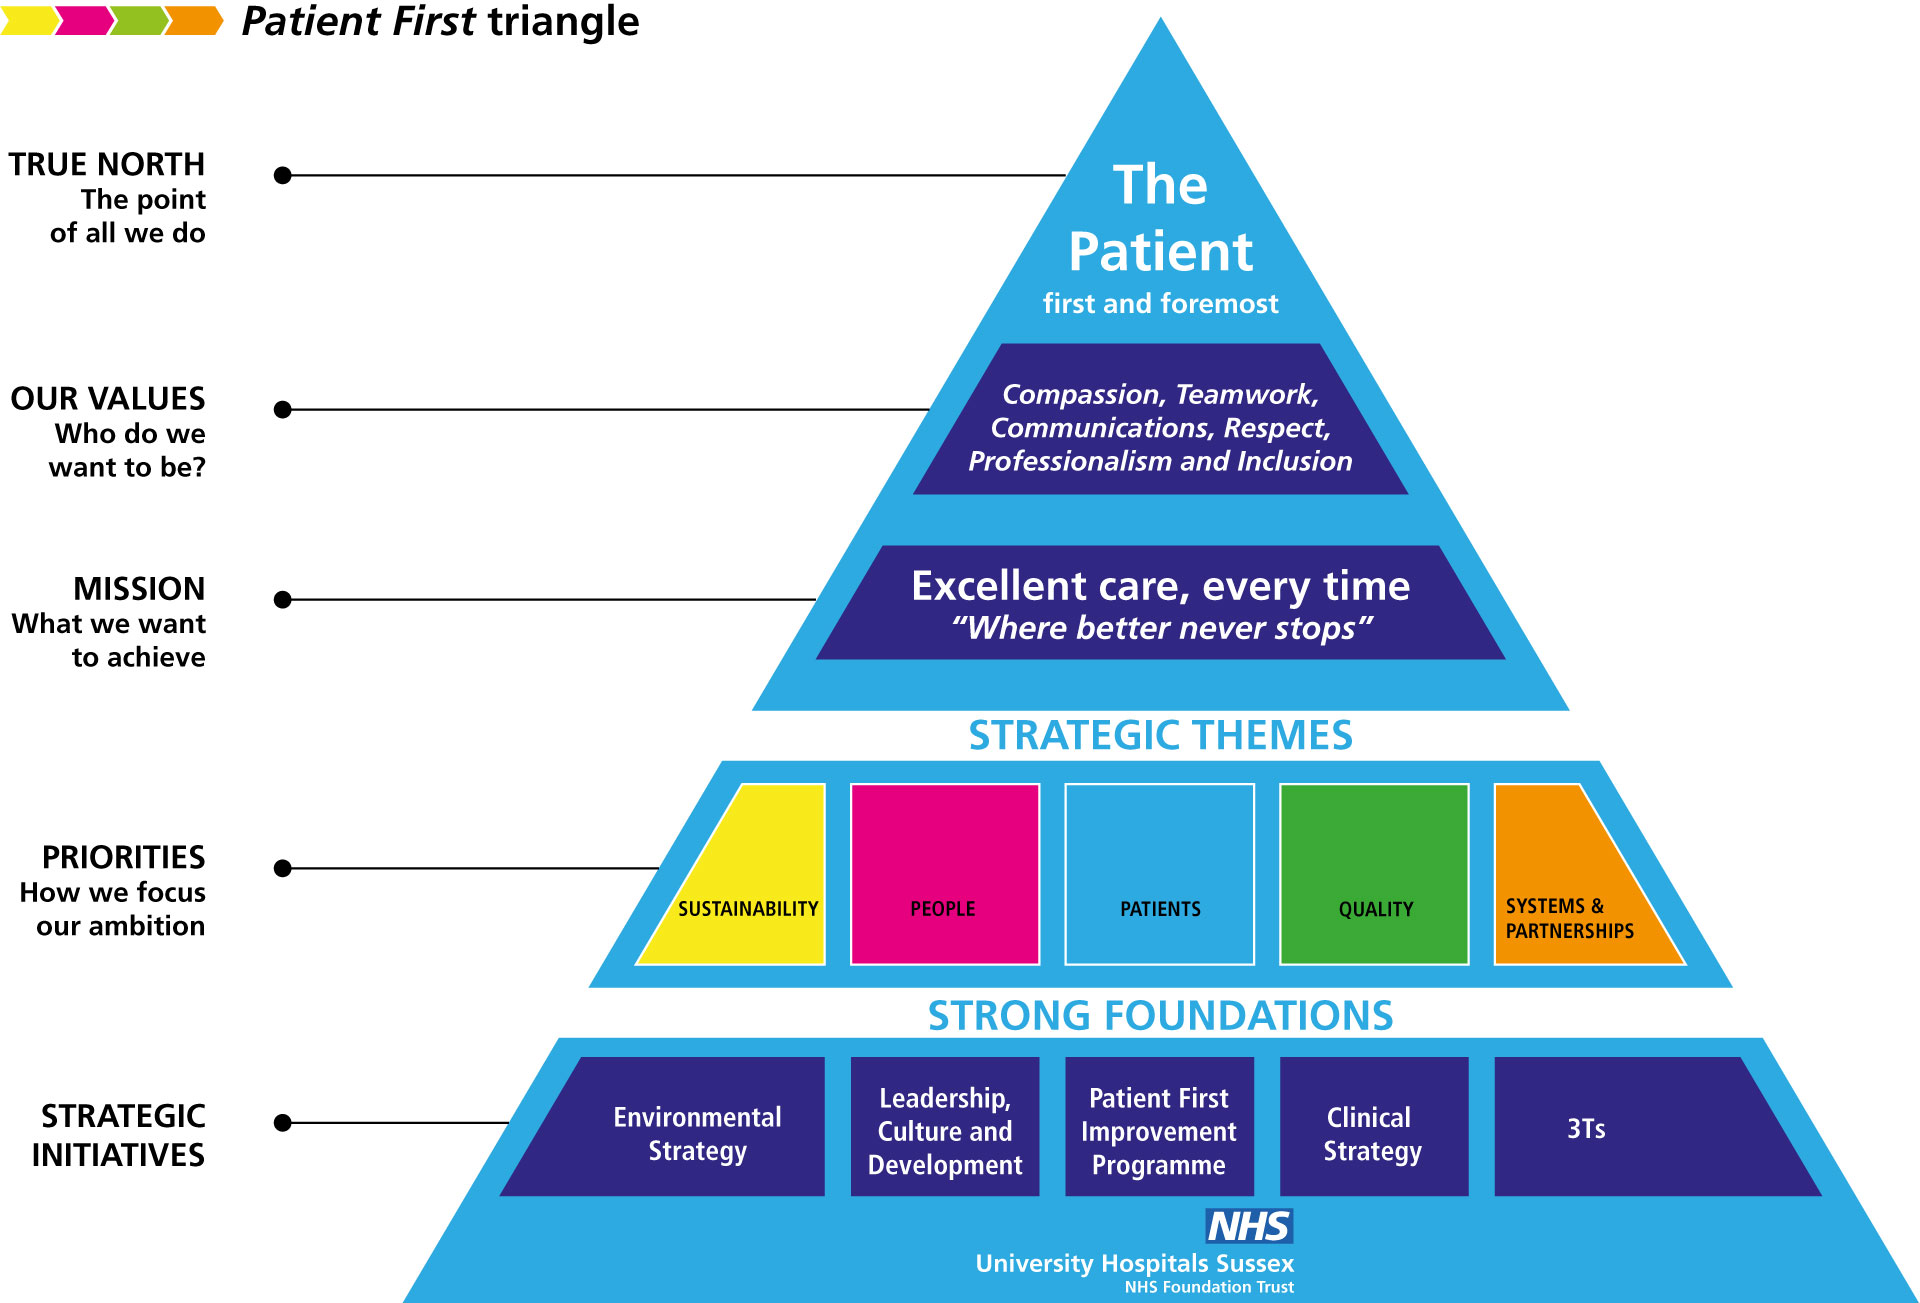 PATIENT FIRST TRIANGLE